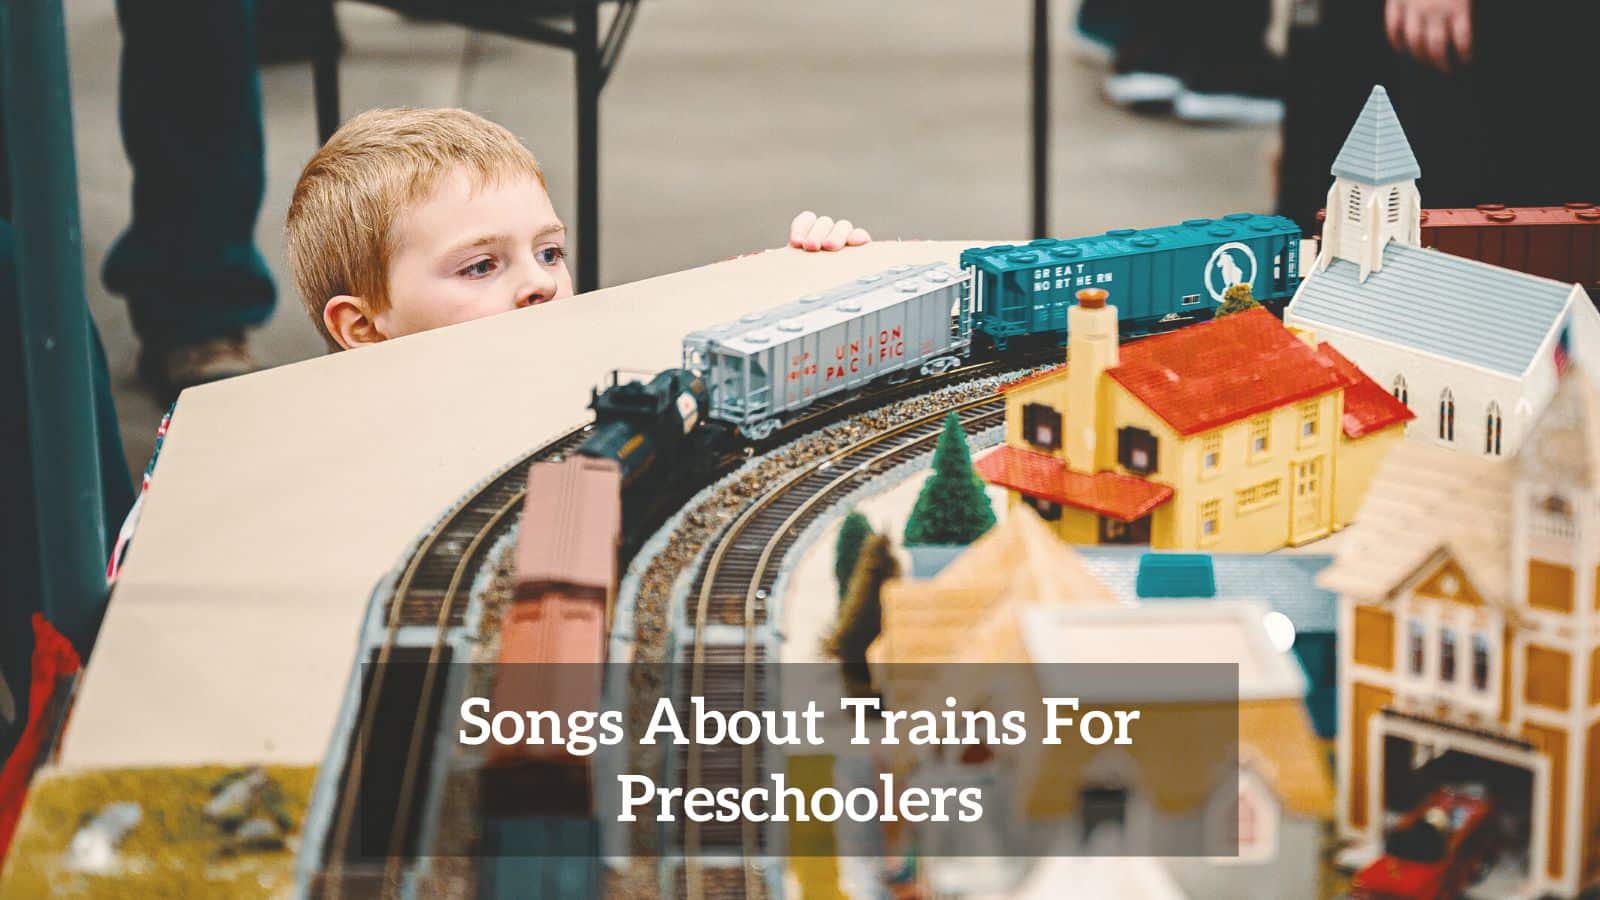 Songs About Trains For Preschoolers